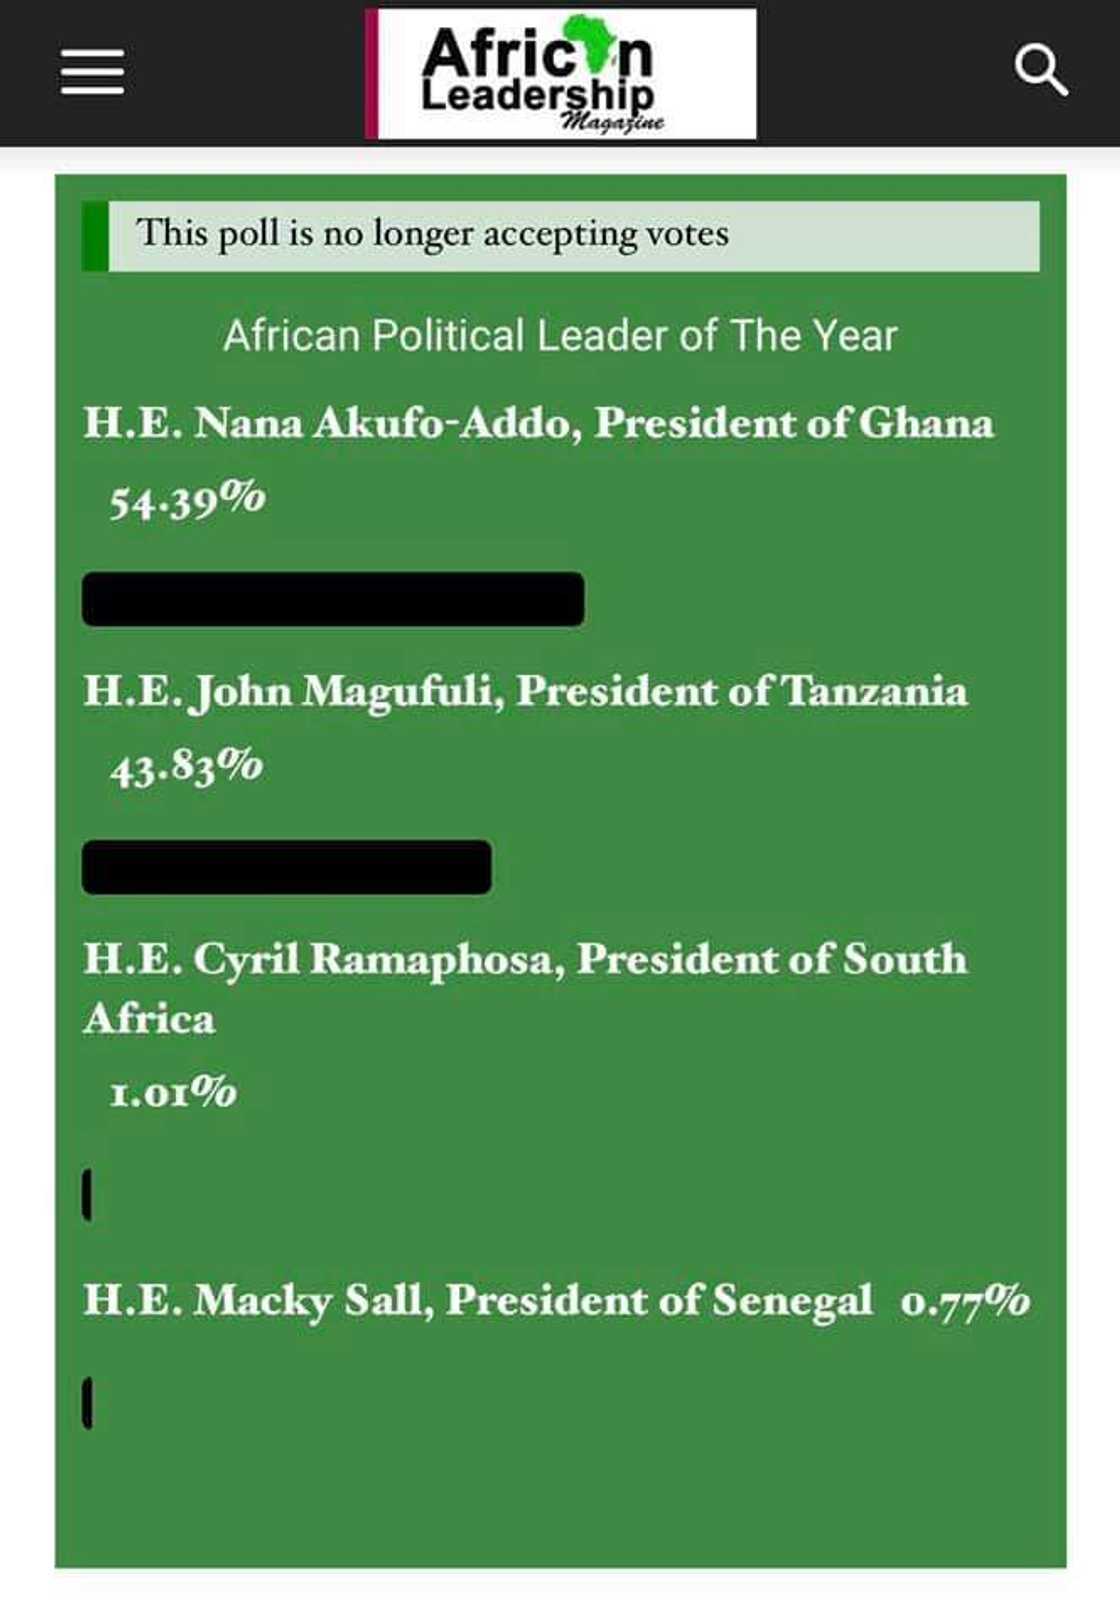 President Akufo-Addo wins African Political Leader of the Year 2020